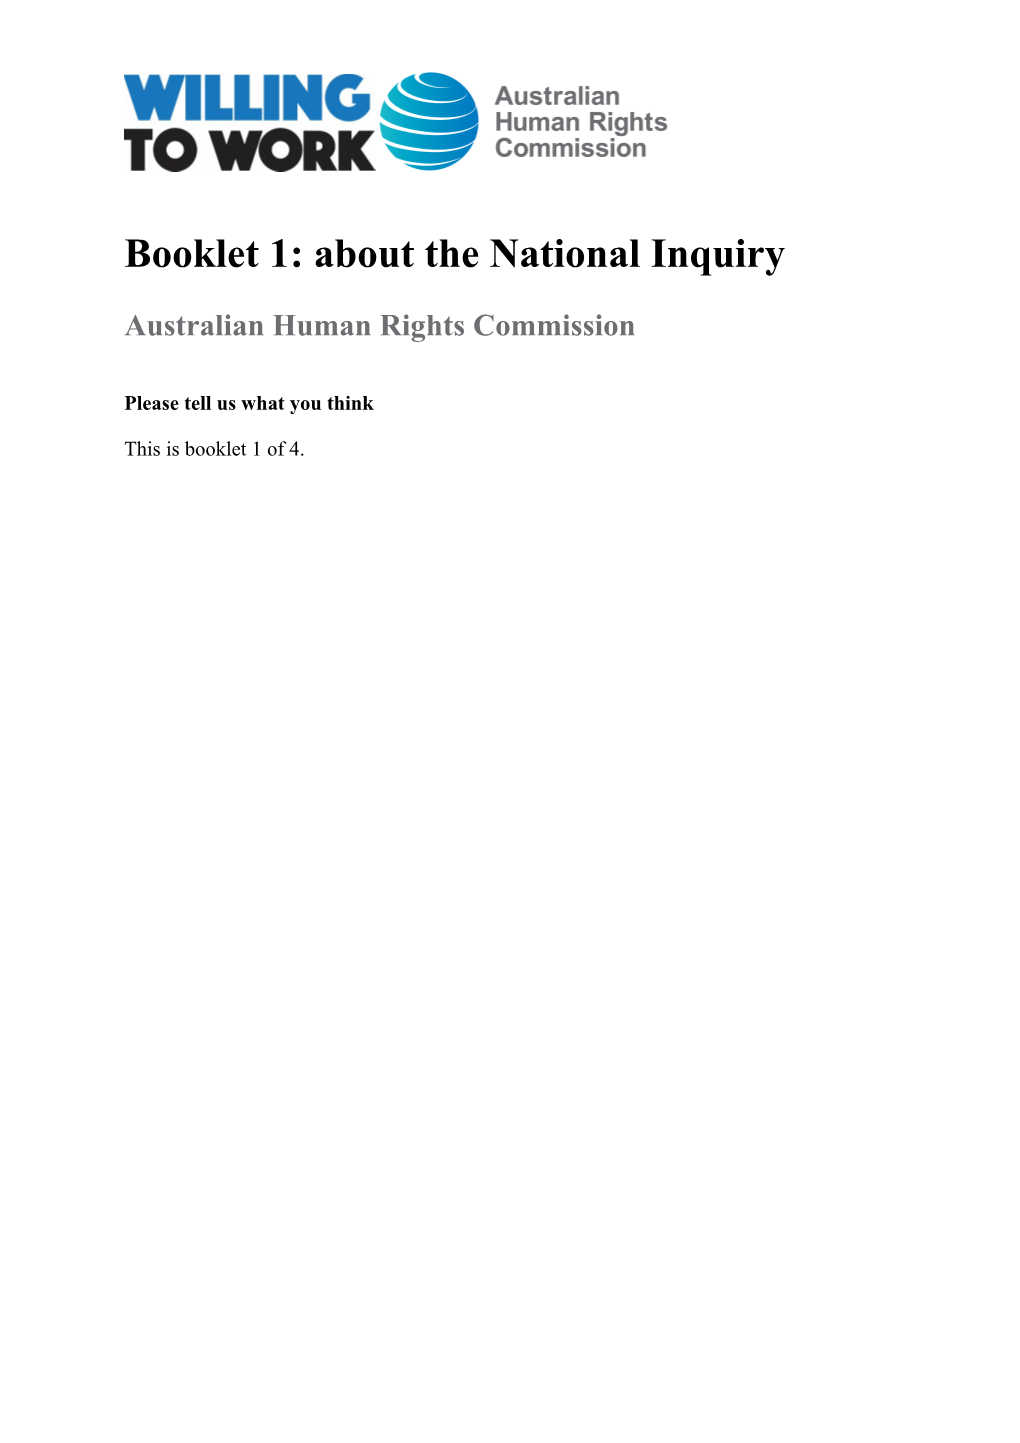 Booklet 1: About the National Inquiry